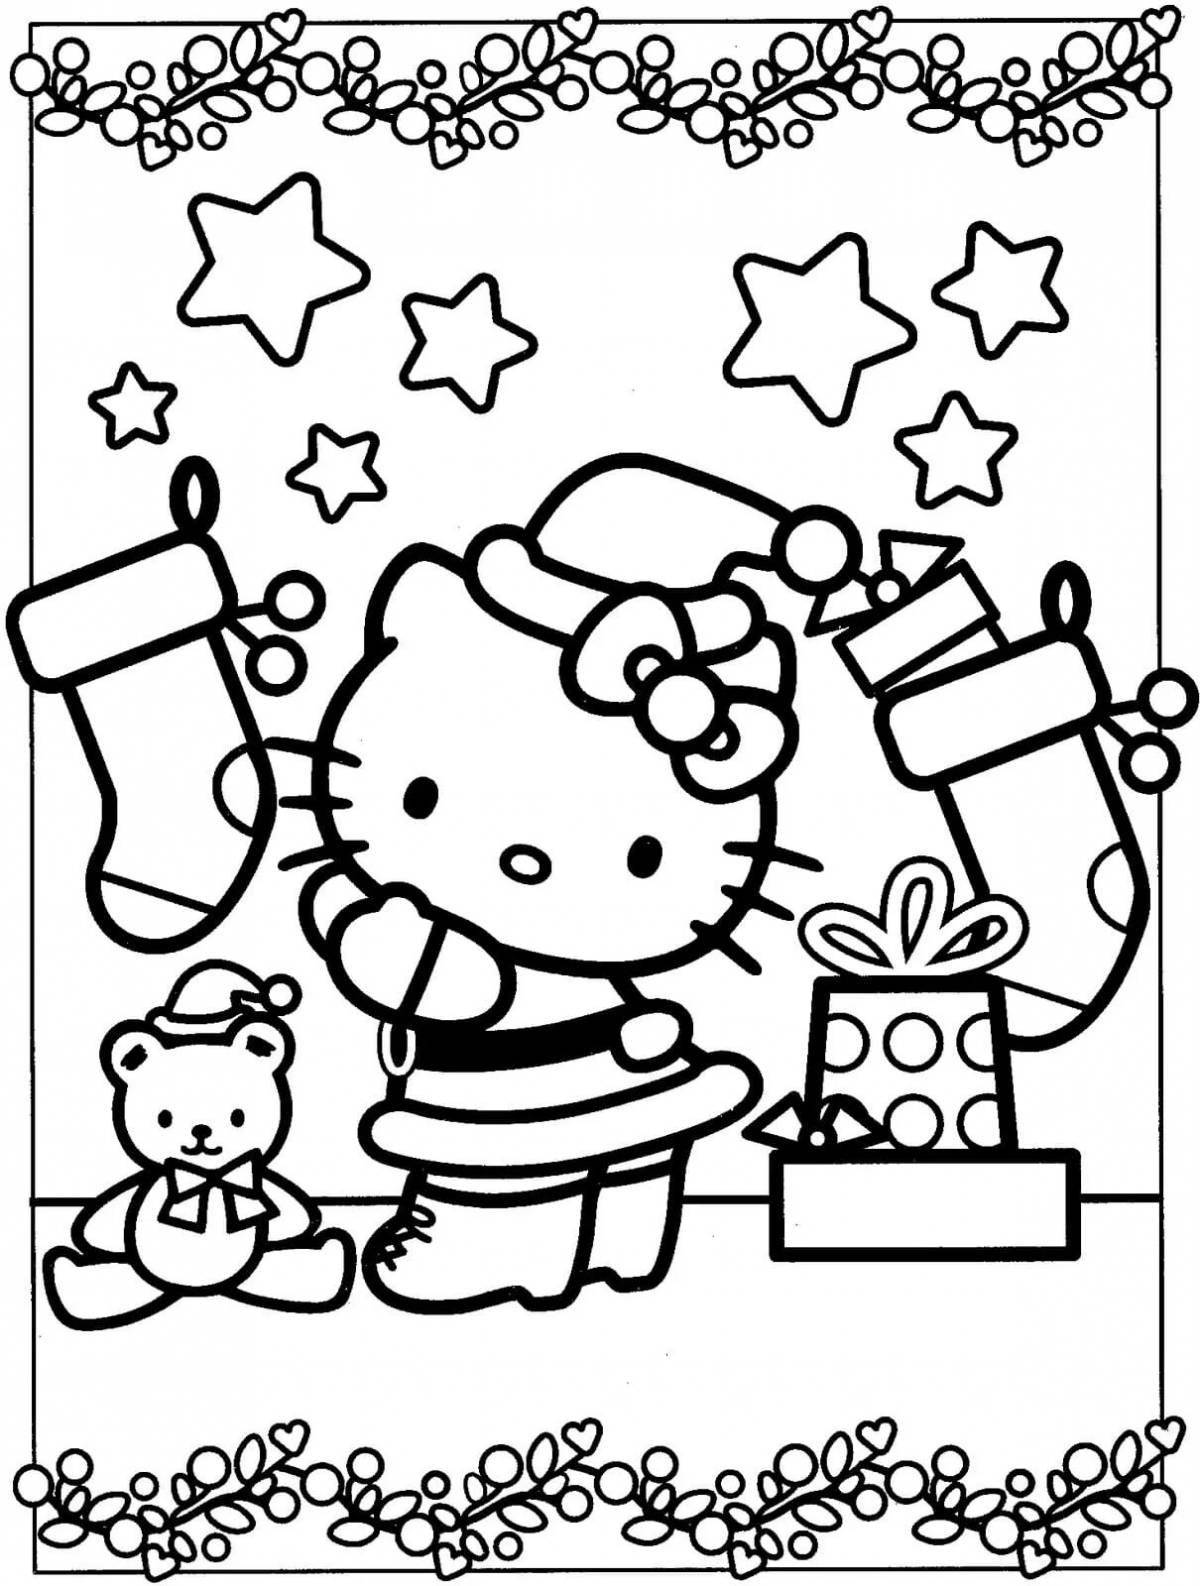 Furry kitty christmas coloring book